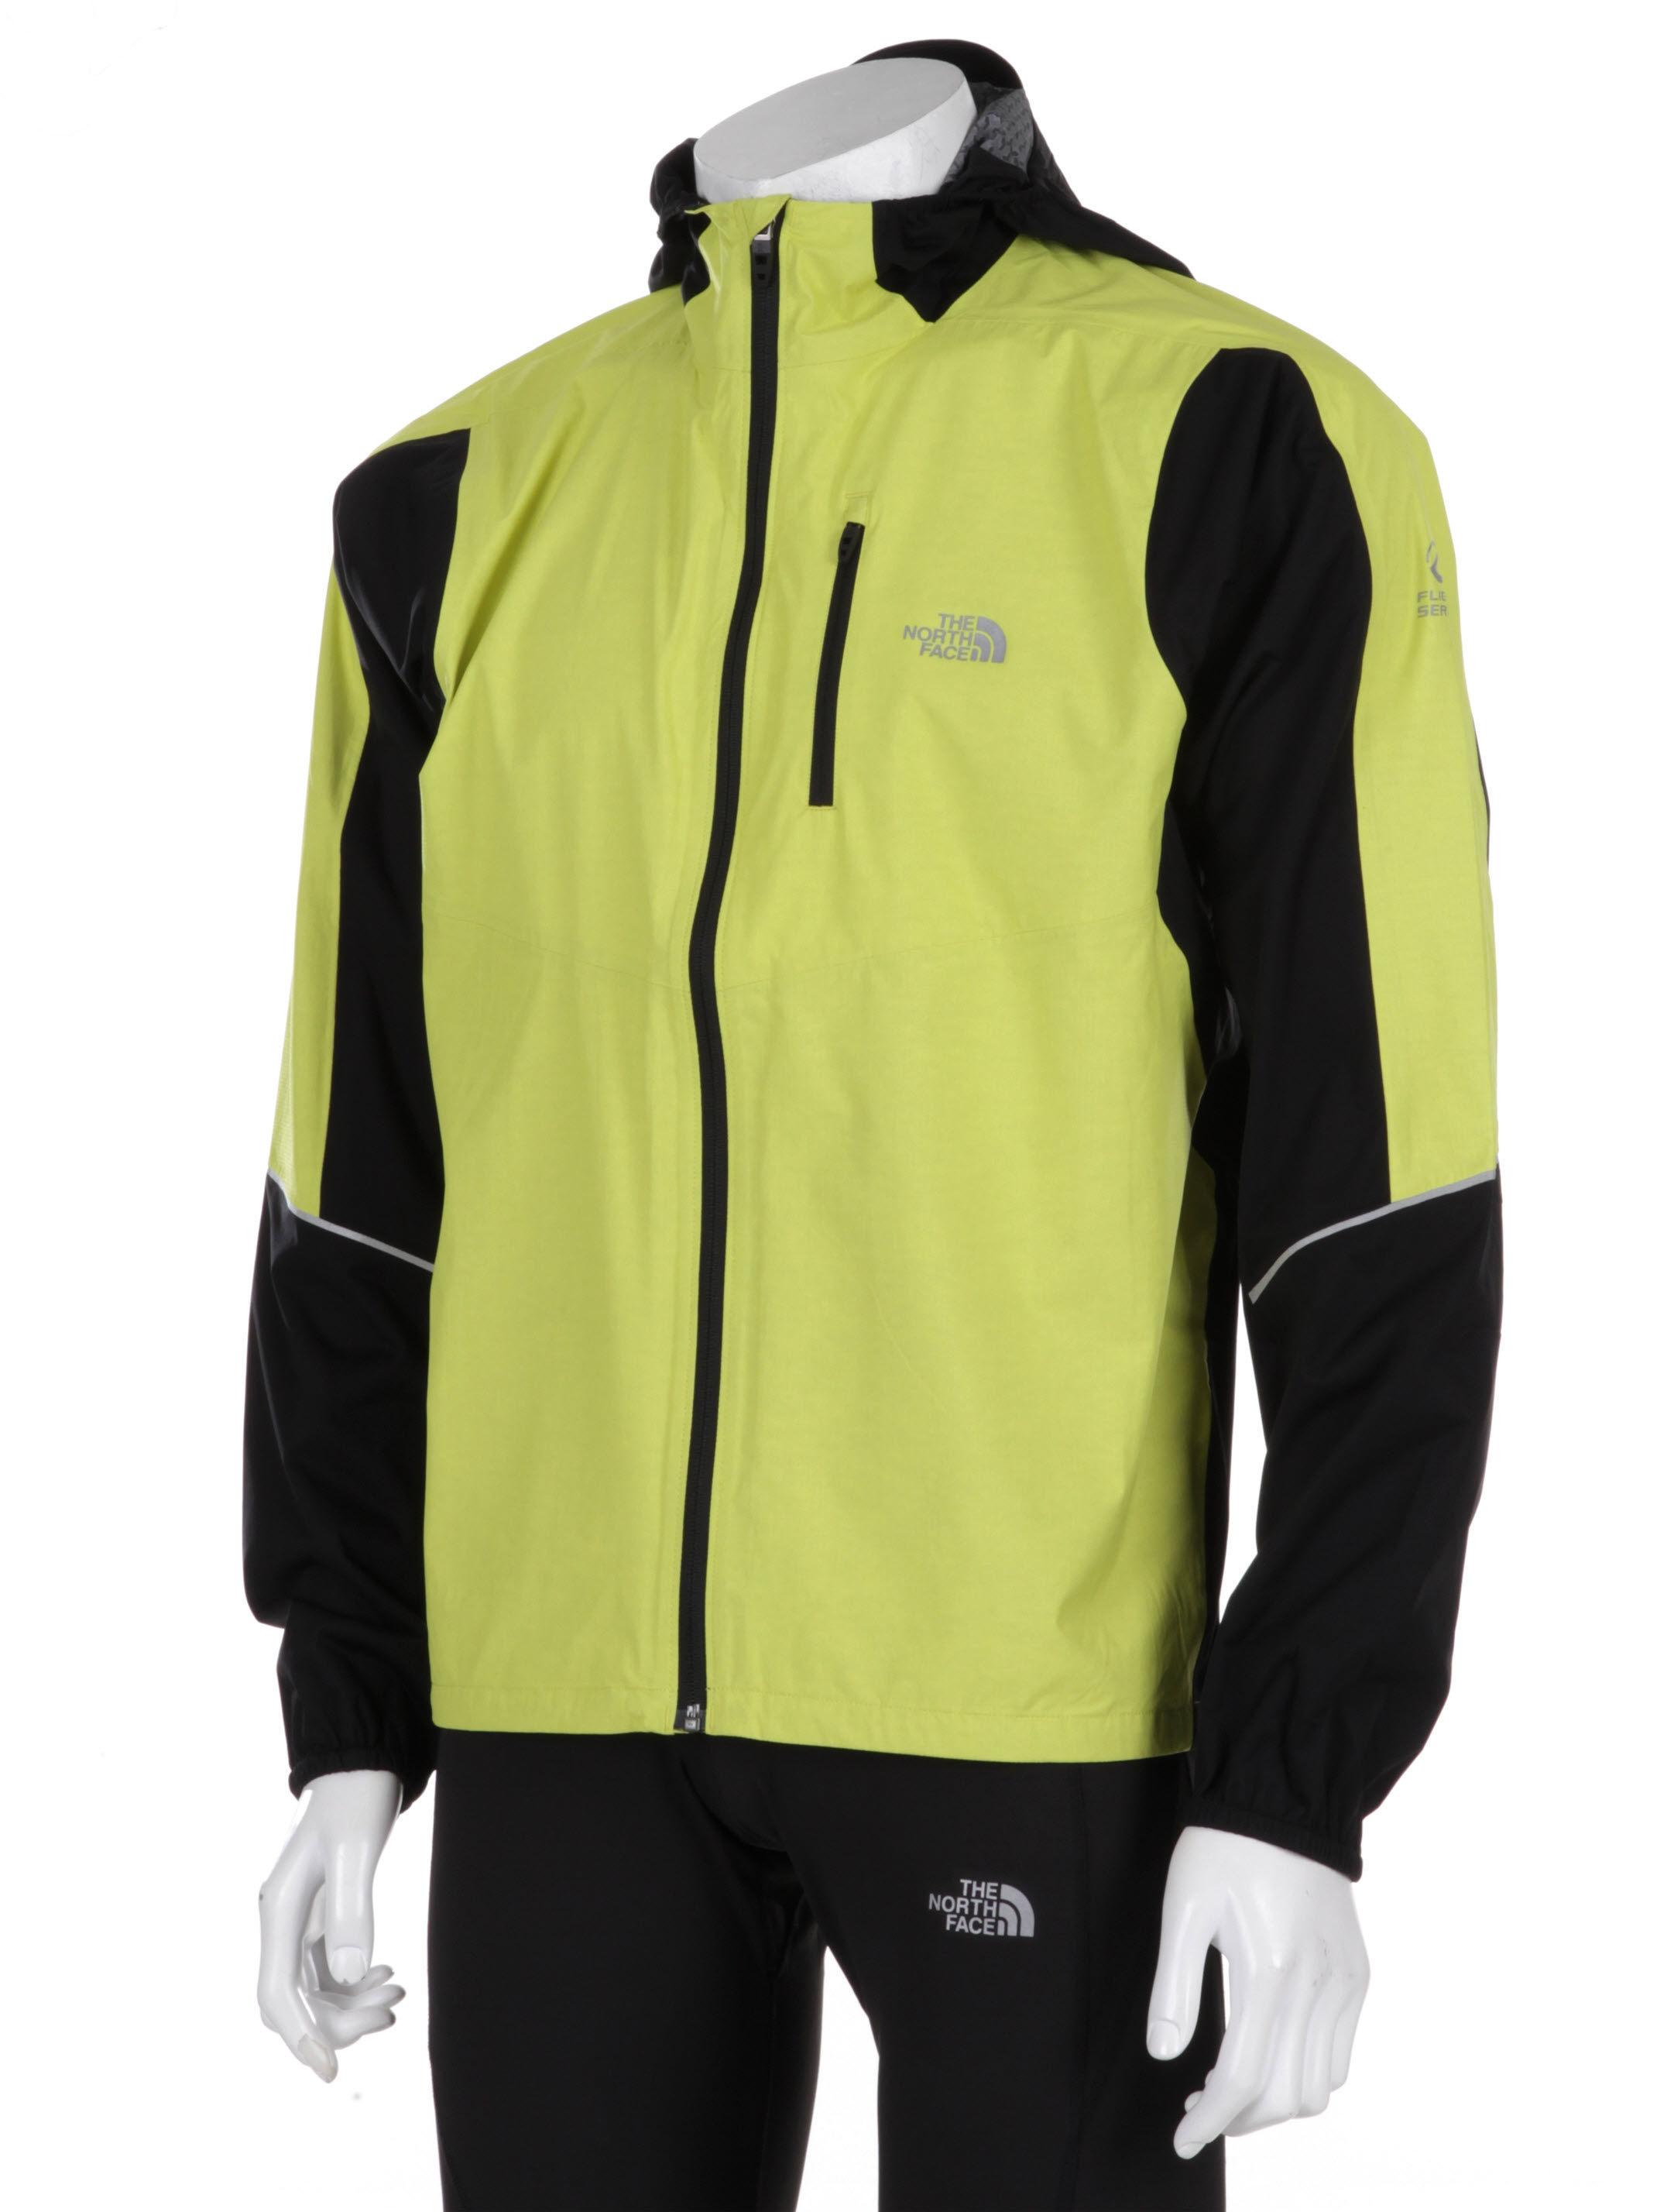 Foto Chaqueta The North Face - AK Storm Trail - Large Energy Yellow foto 115702